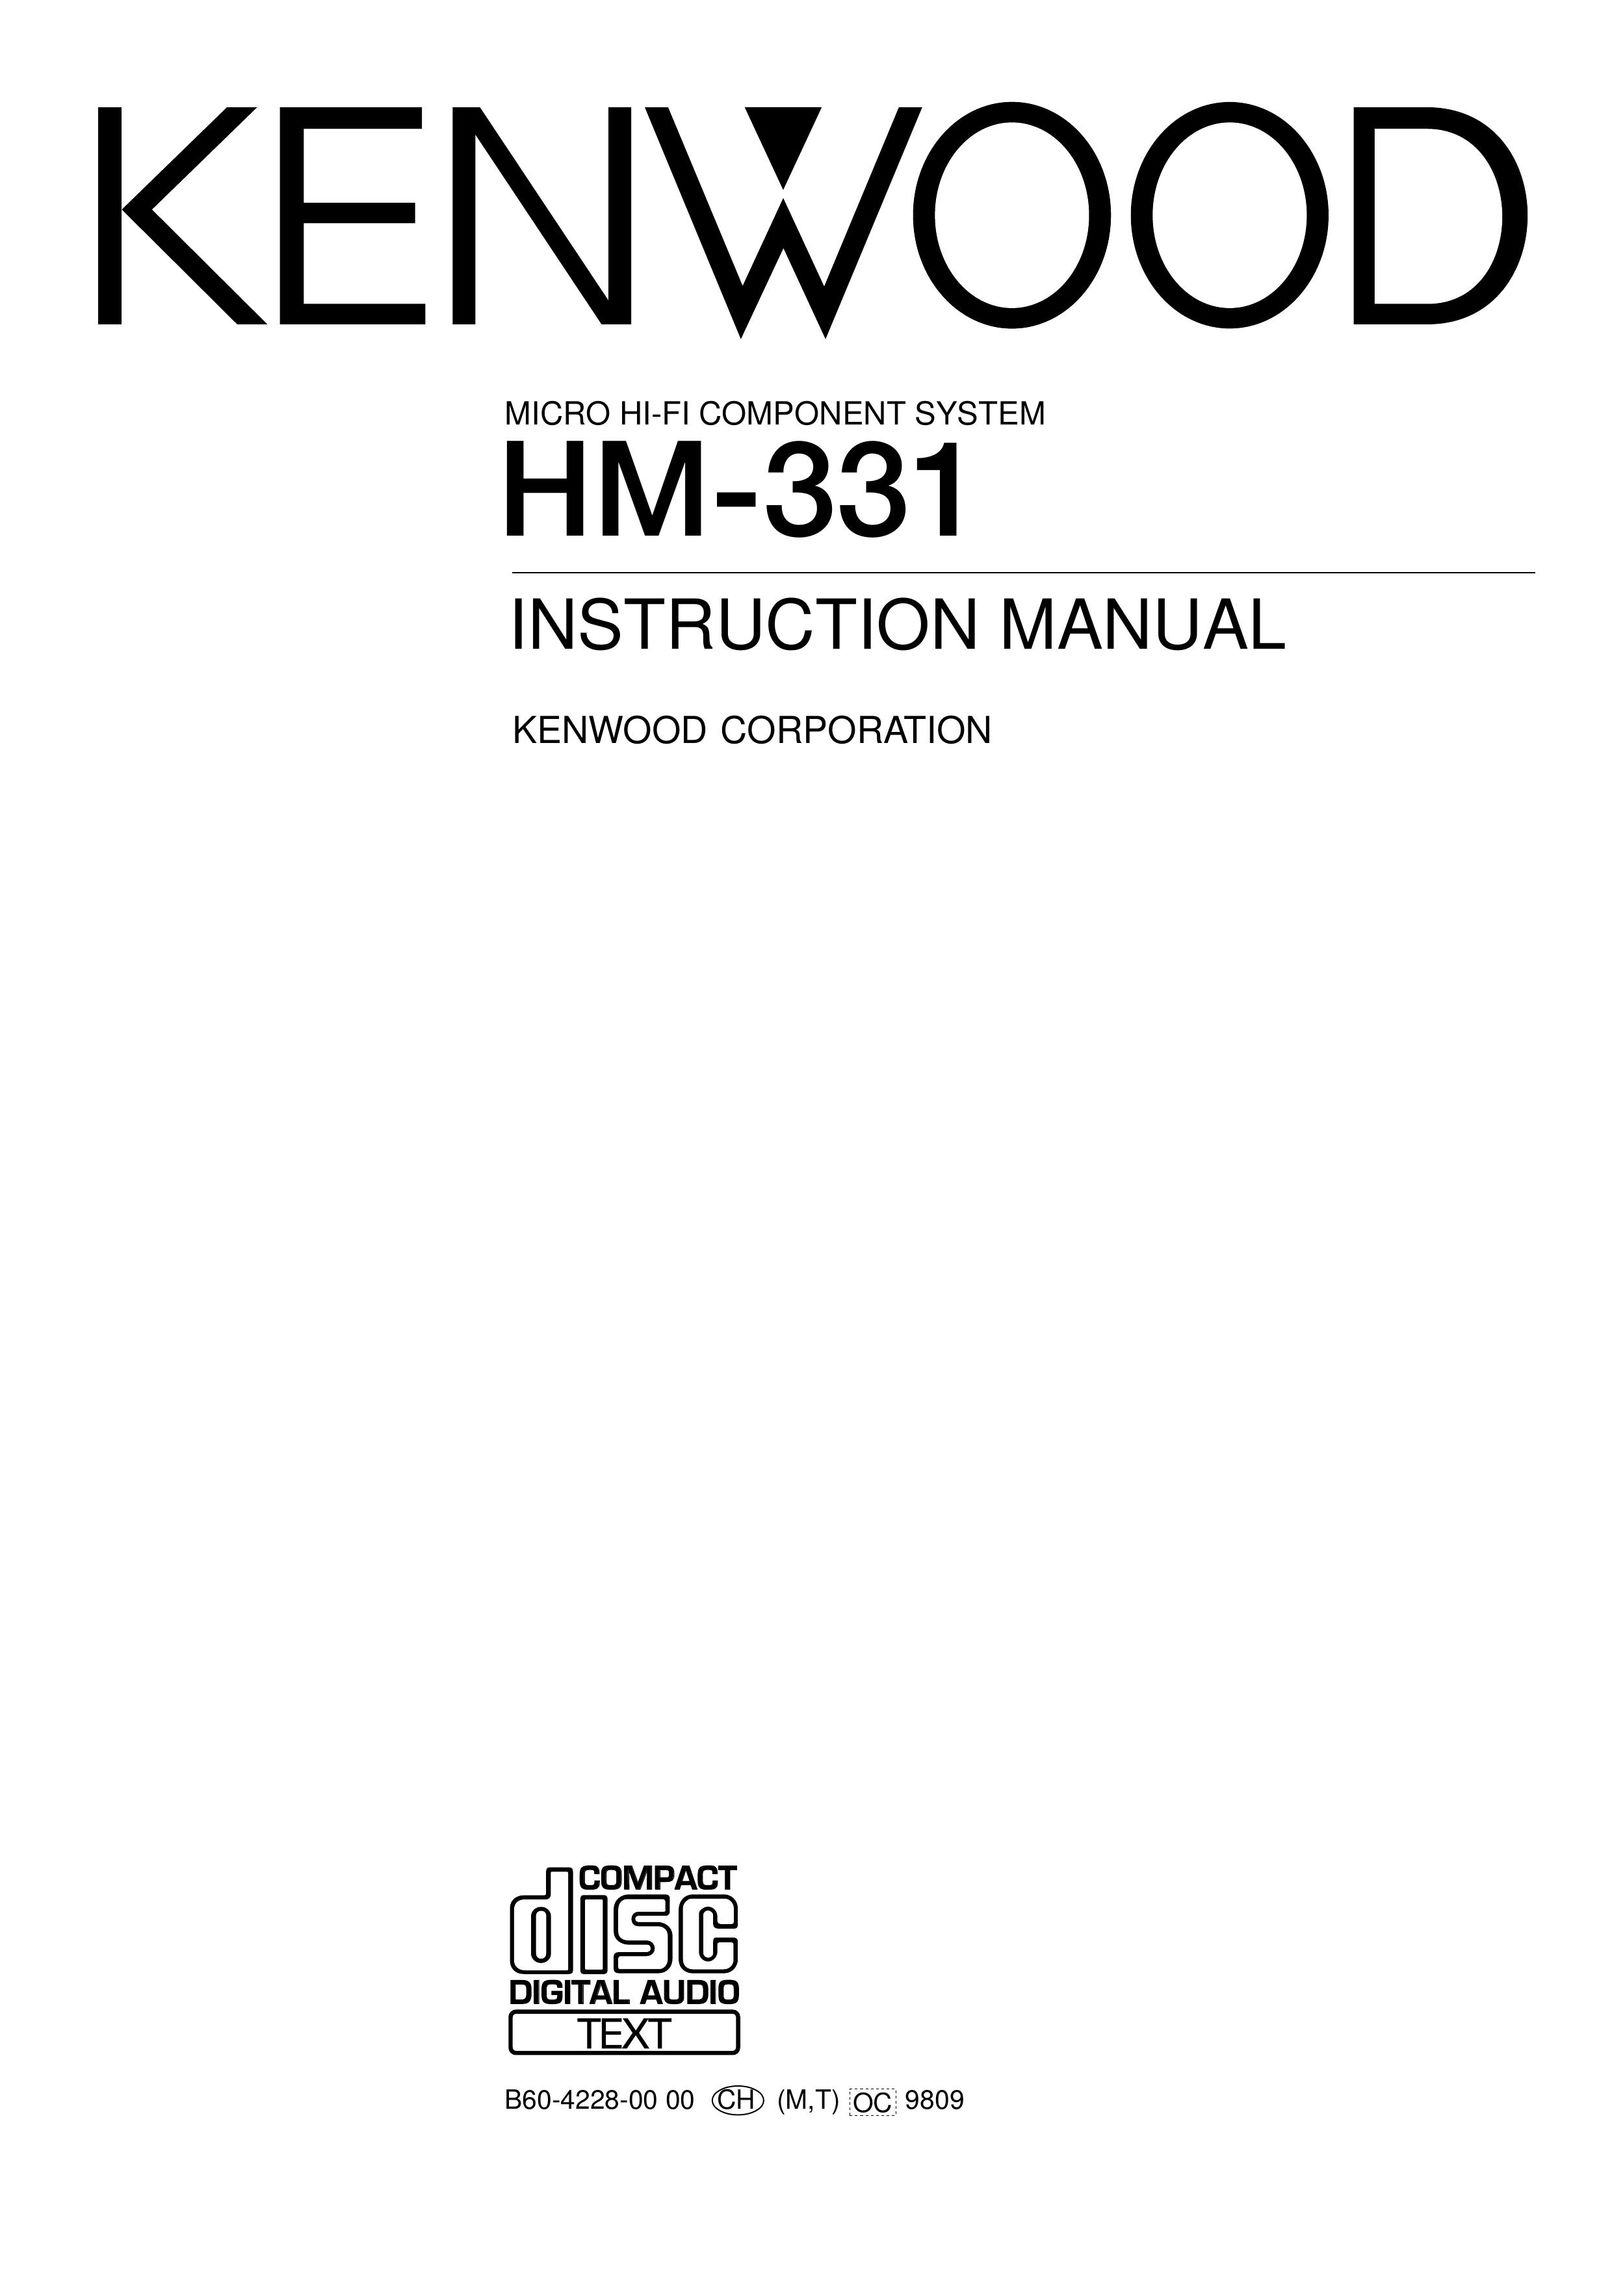 Kenwood HM-331 Home Theater System User Manual